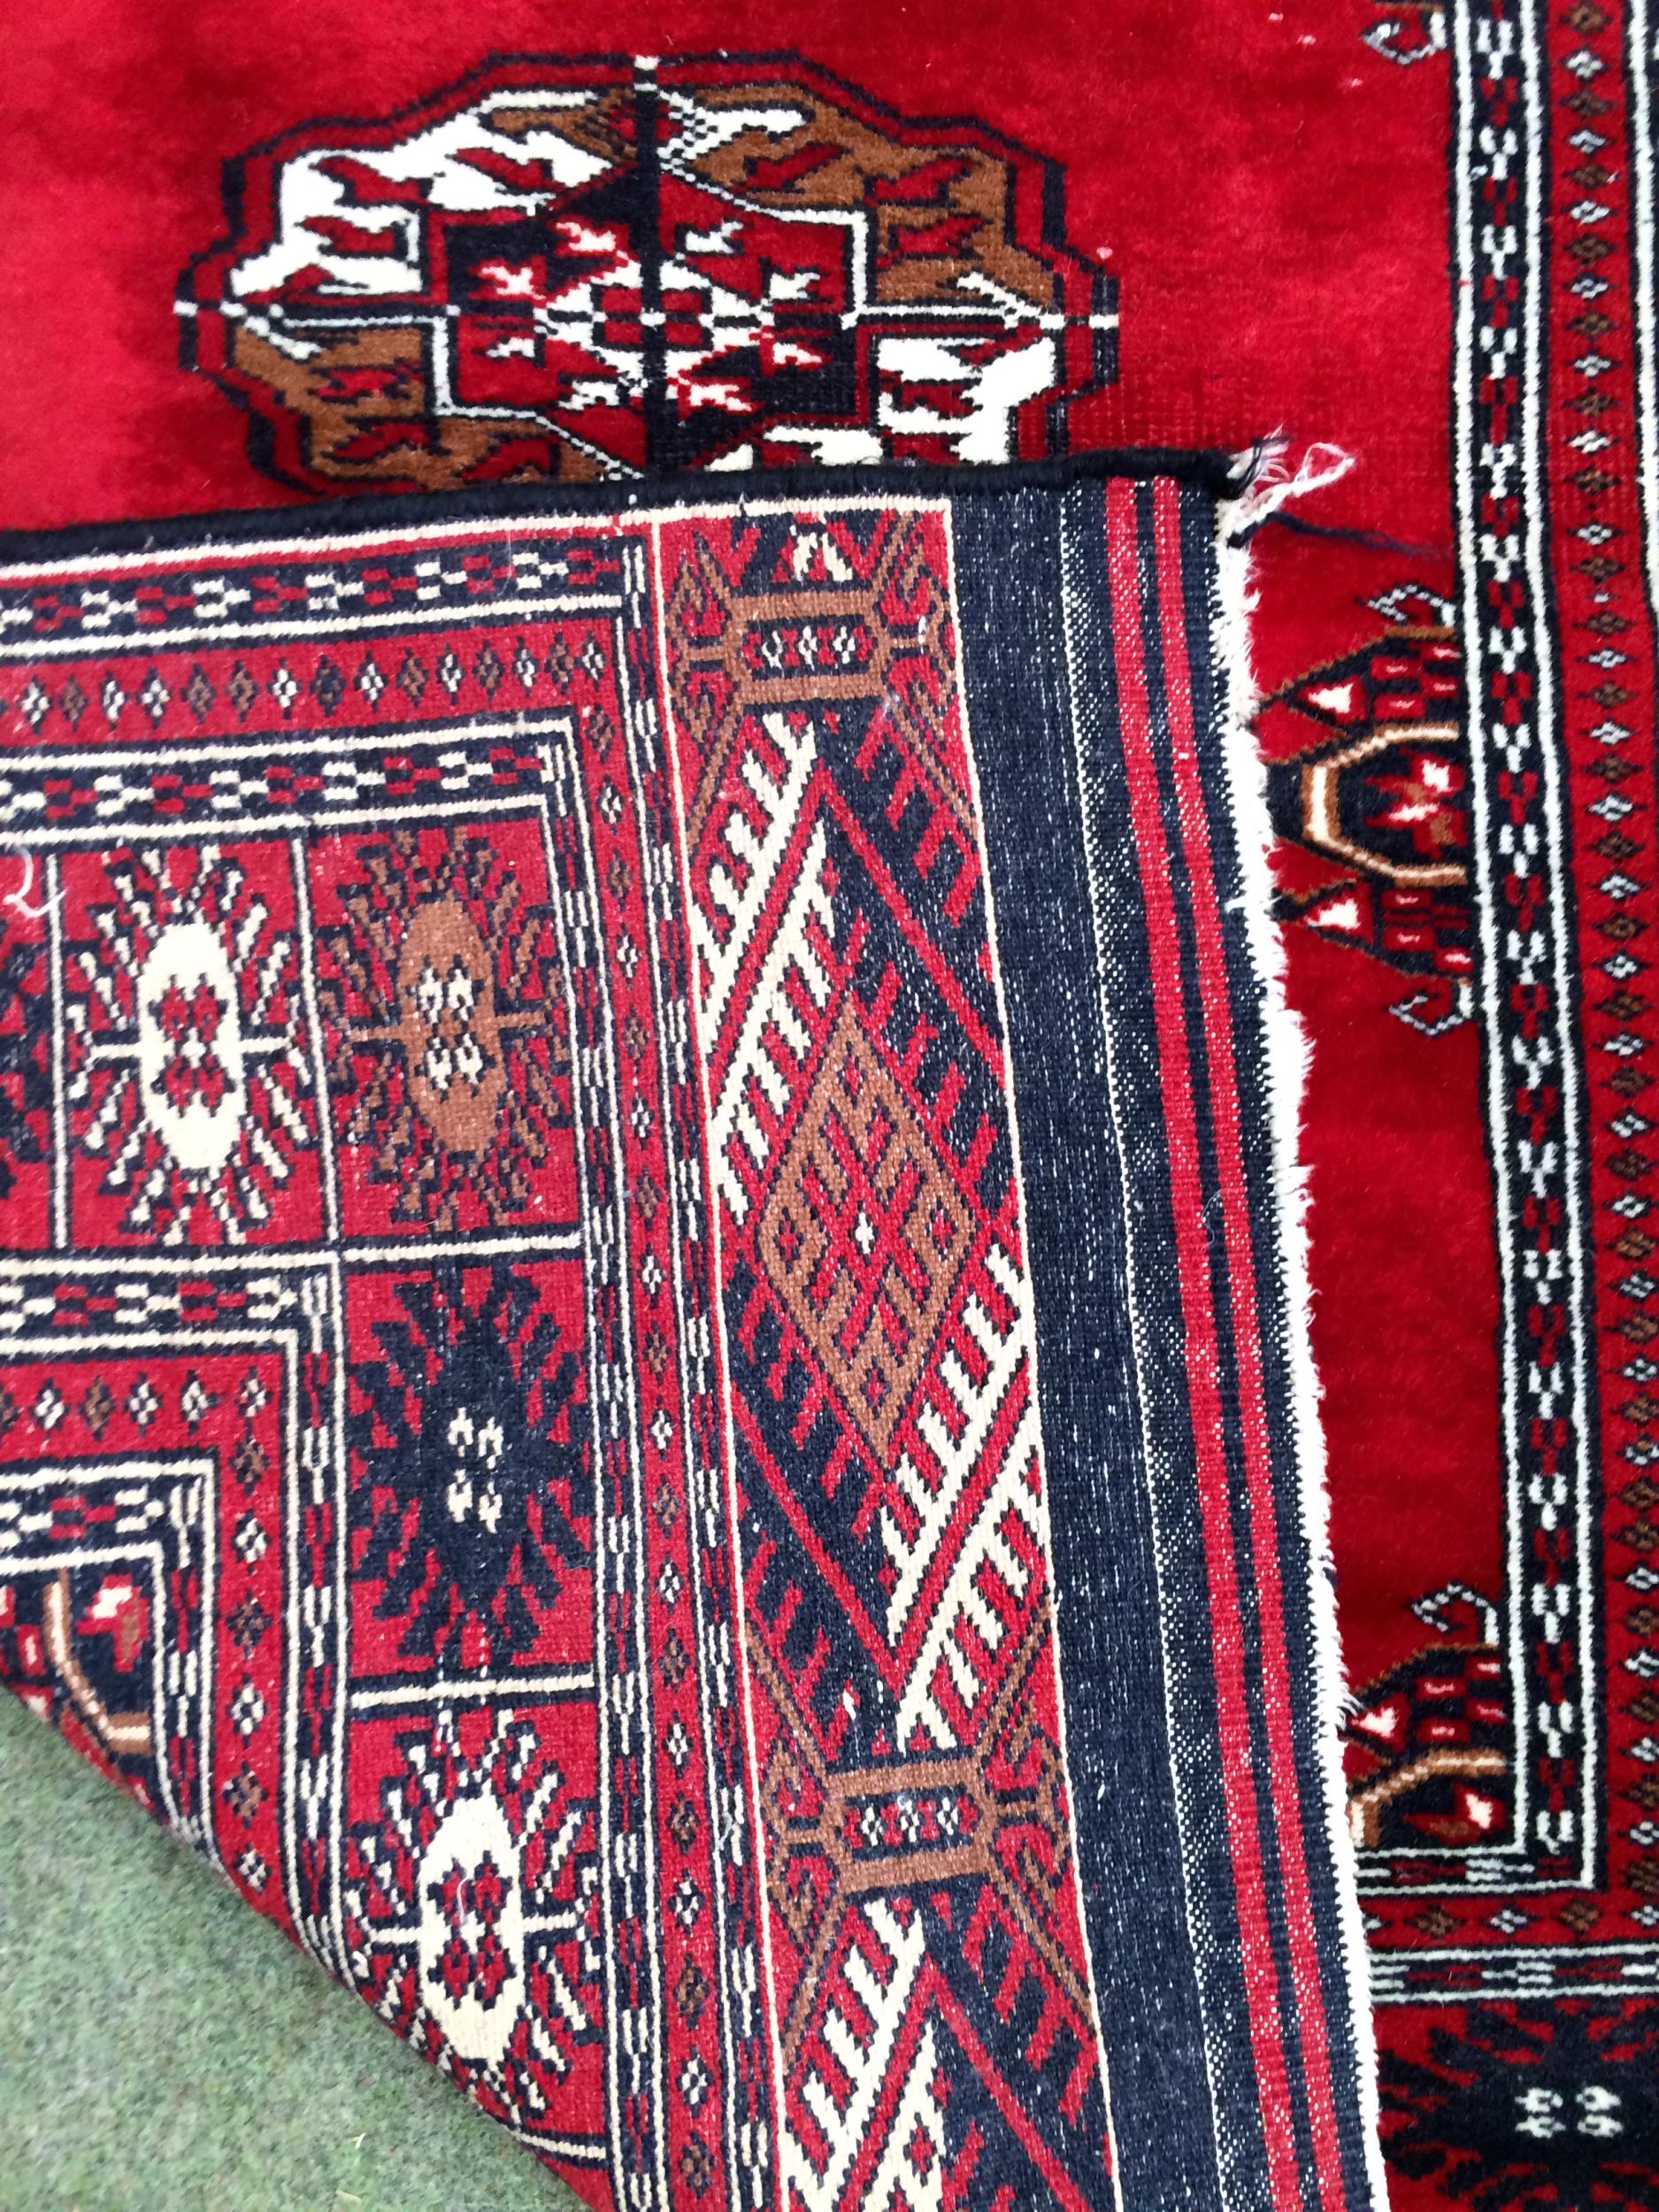 4 rugs, 3 red ground rugs with all over geometric stylized designs, and a blue and red ground Tree - Image 4 of 9